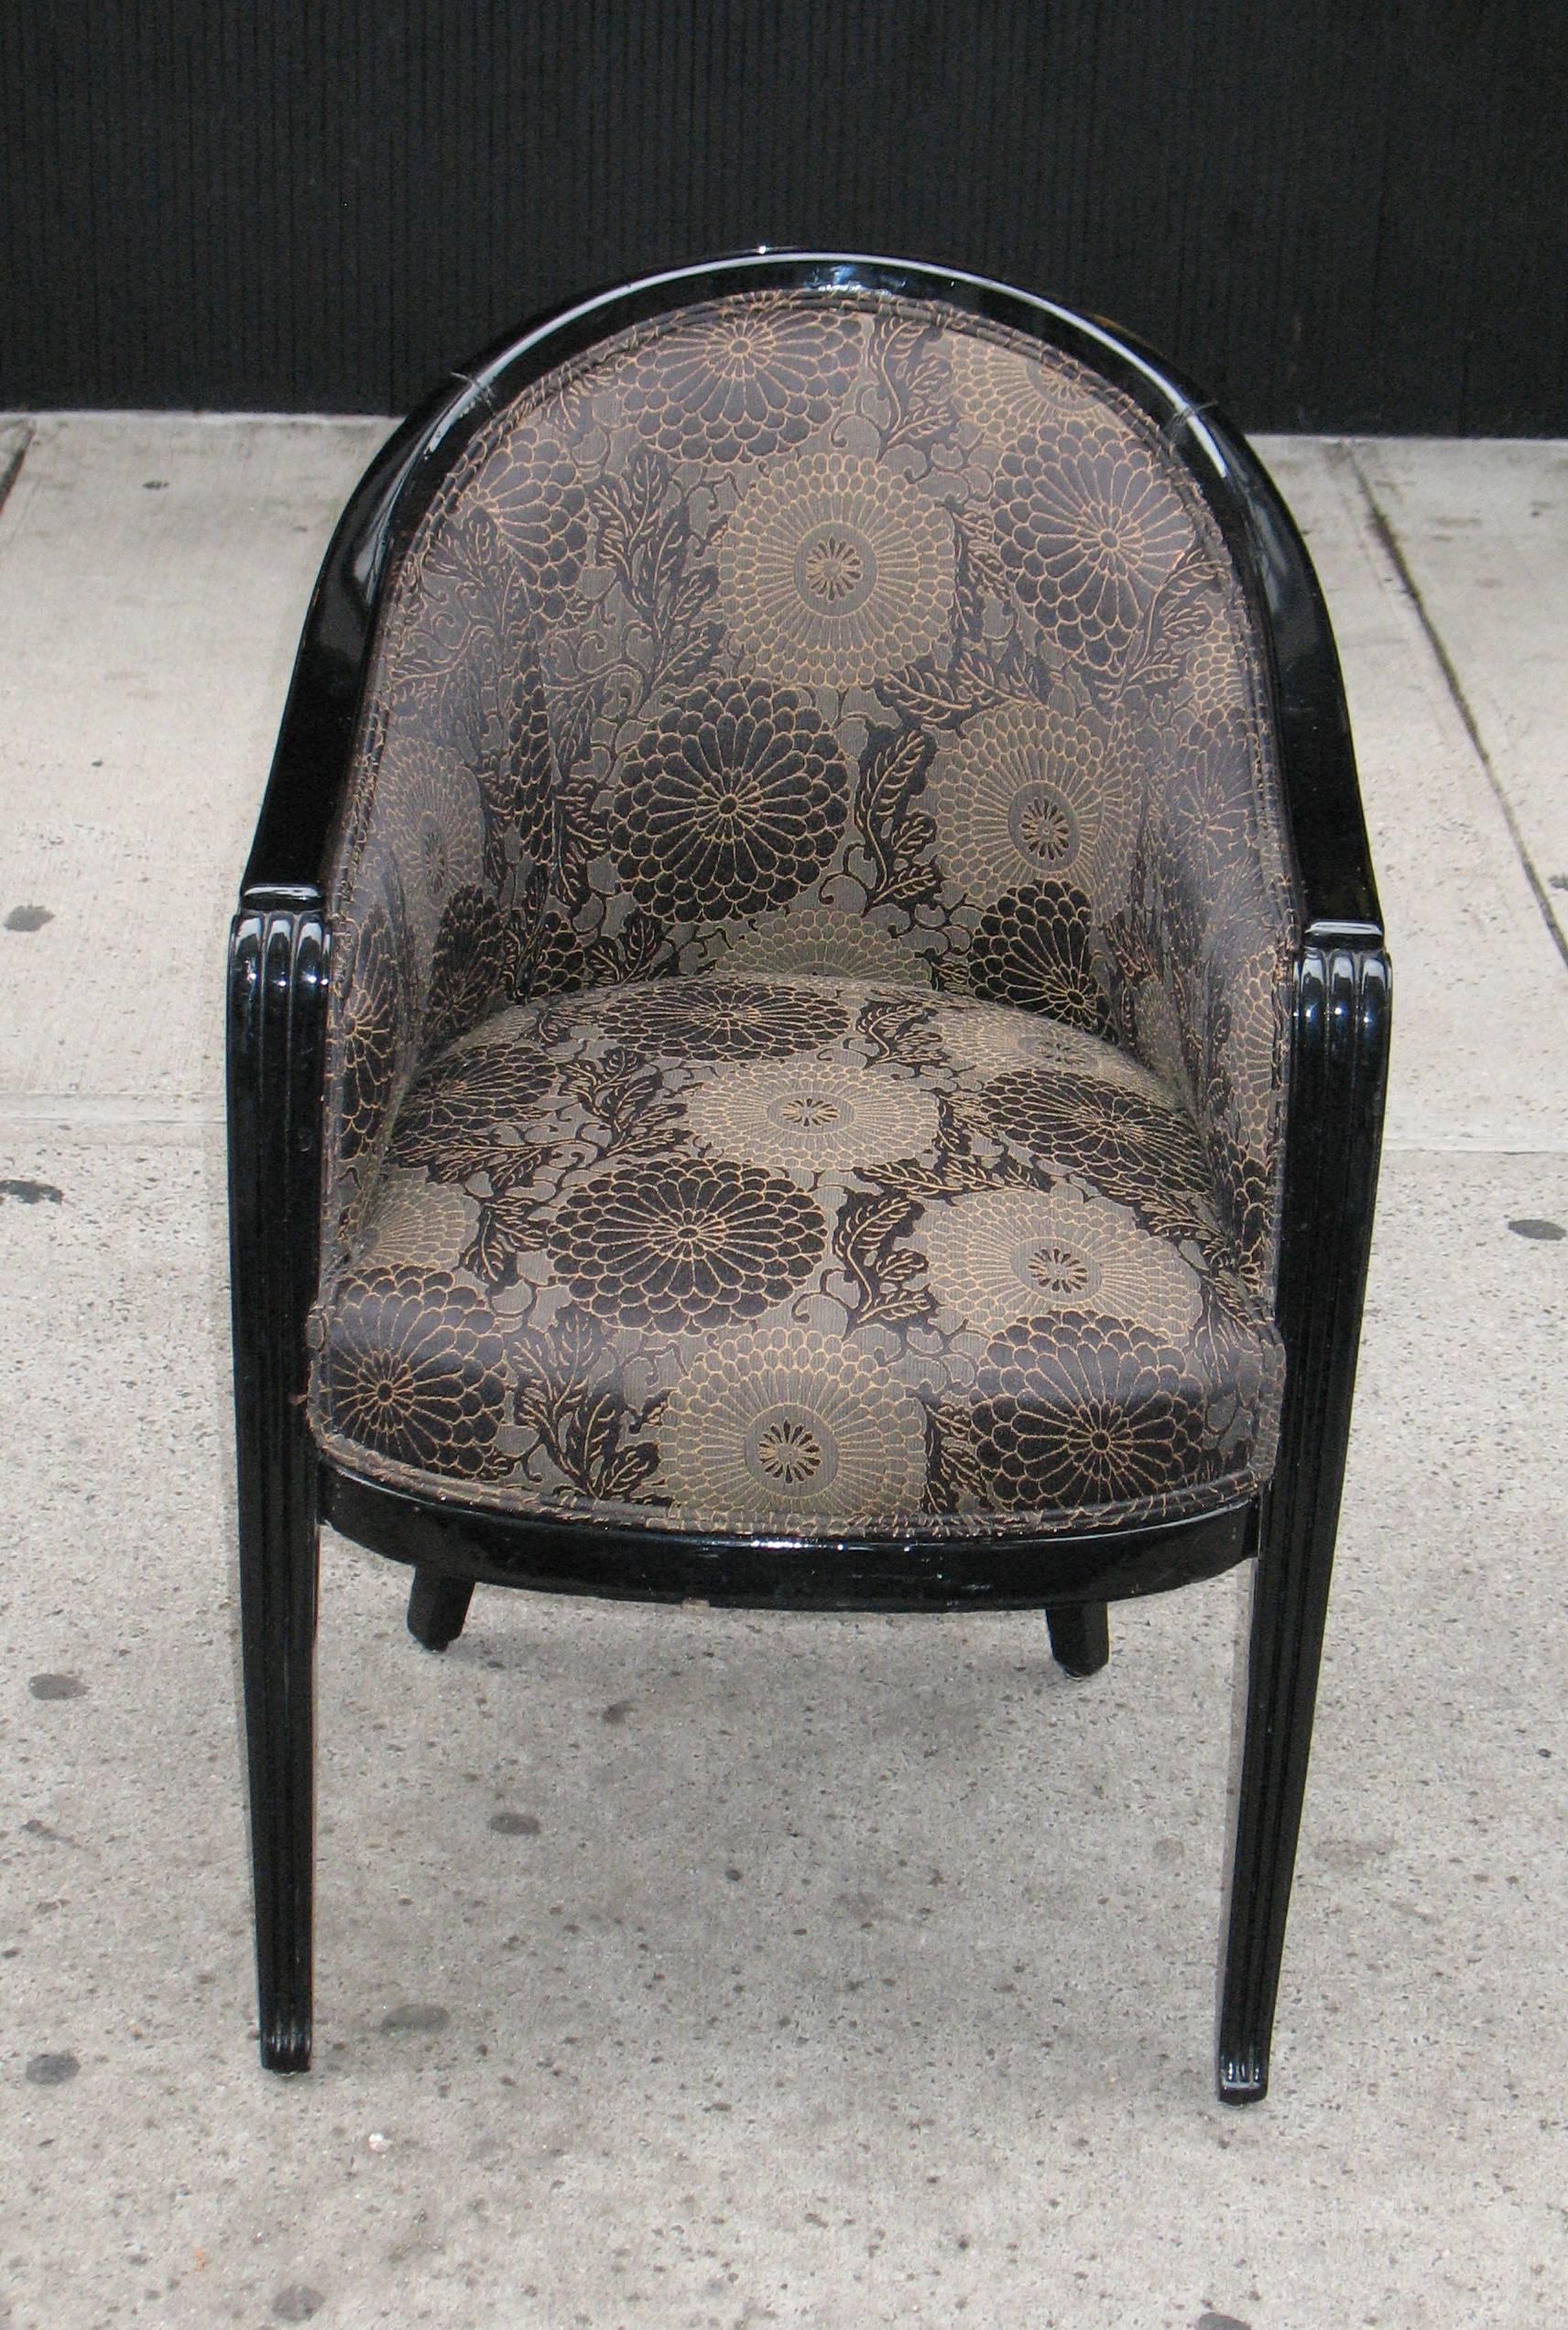 FROM OUR NEW MID-CENTURY MODERN & ART DECO SHIPMENT:
This barrel-back ebonized French Art Deco bergere with fluted front posts and paw feet is influenced by the Neoclassicism. Re-upholstered with webbing, coil springs, horsehair and covered with